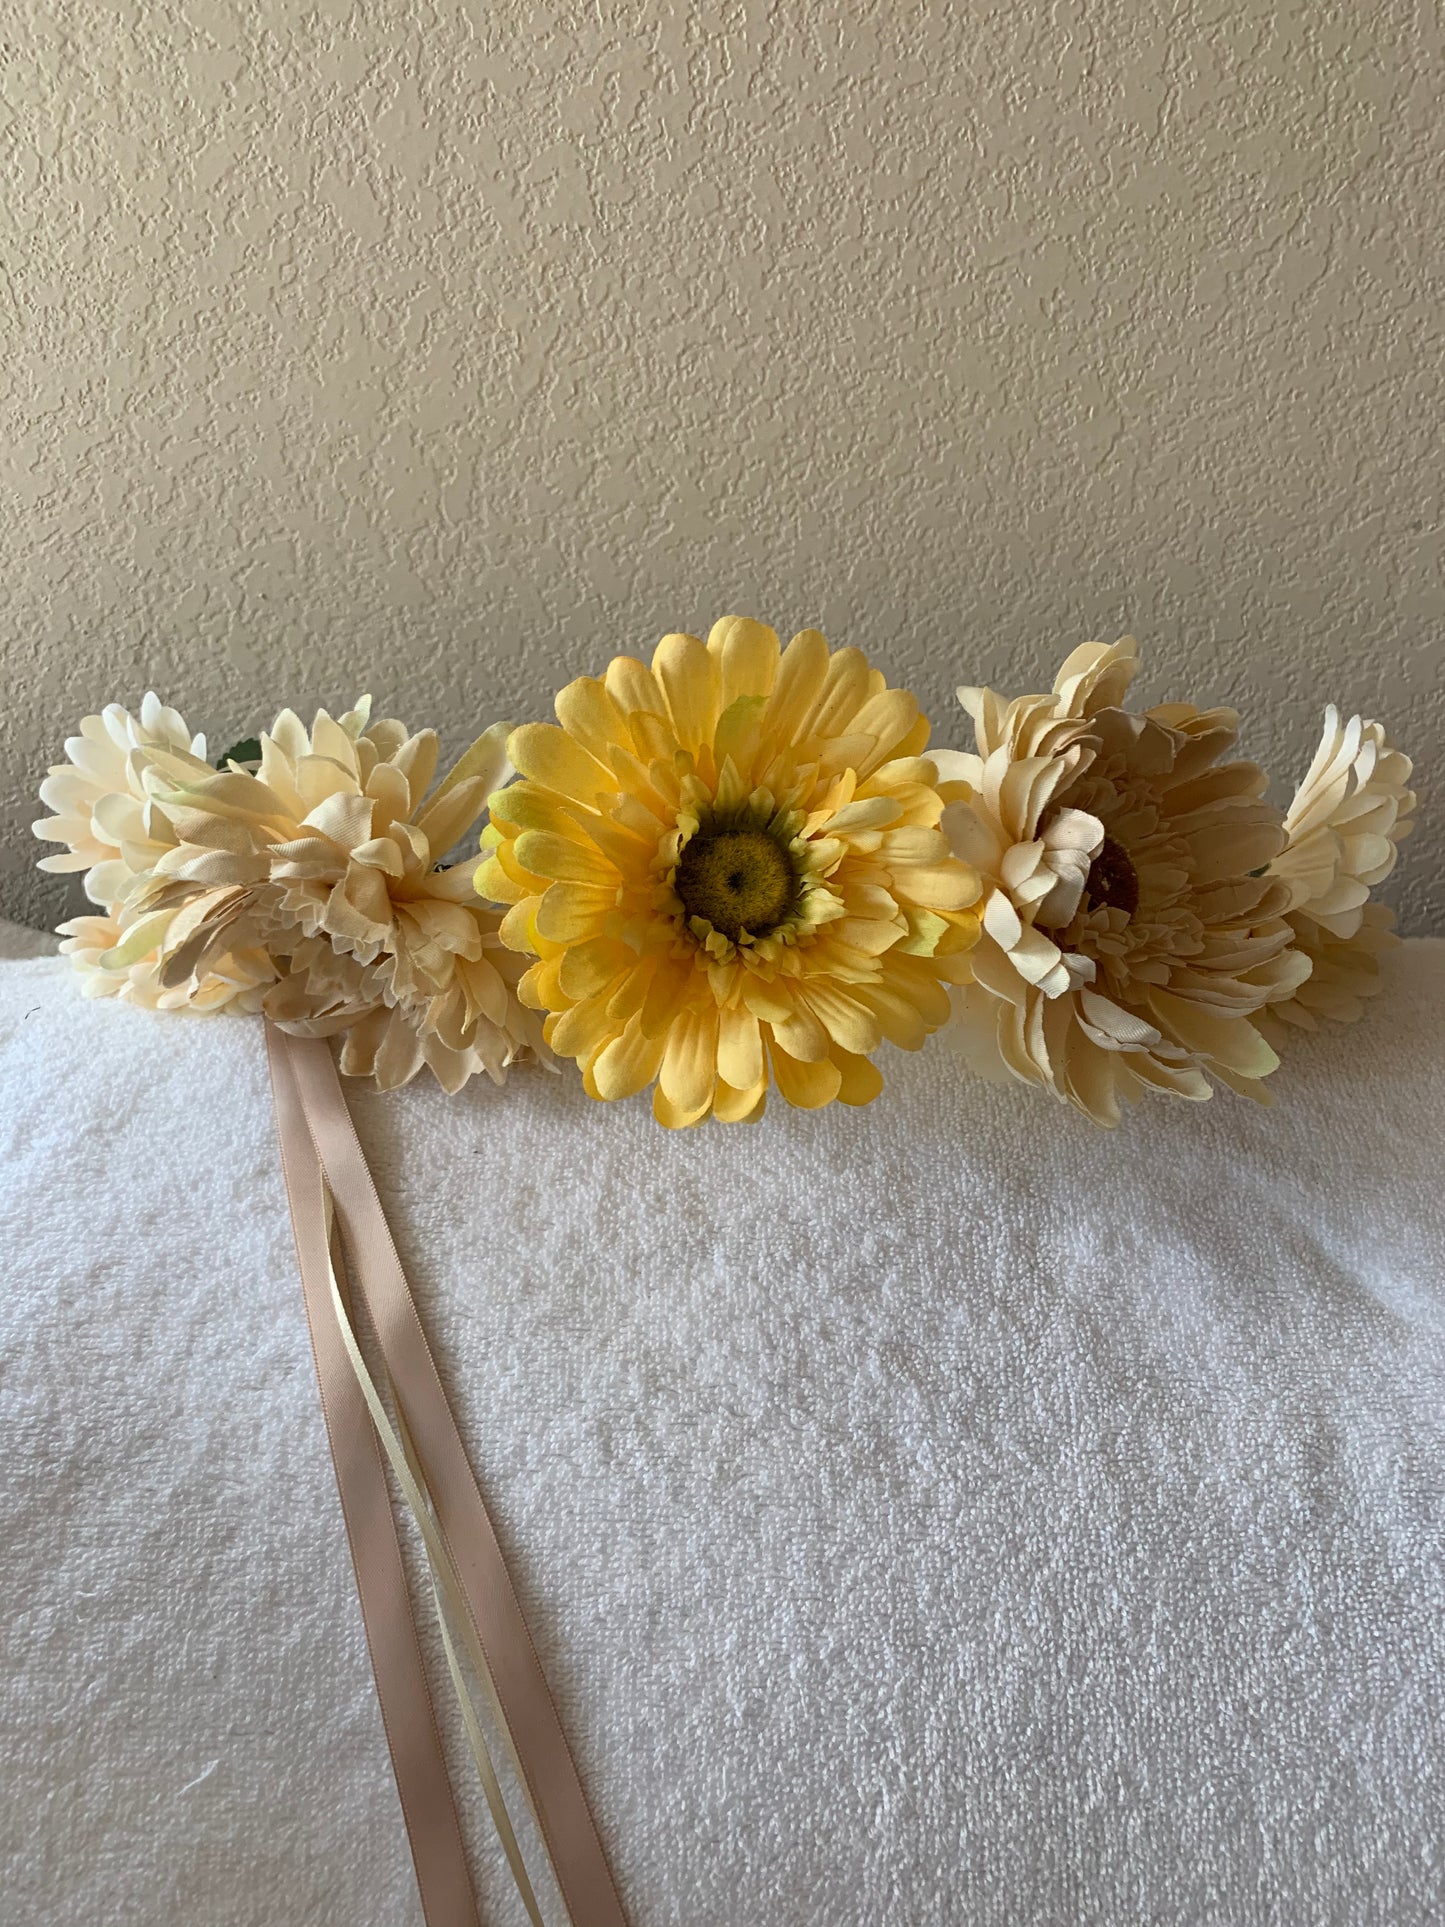 Large Wreath Lighted - Different Beige Daisies